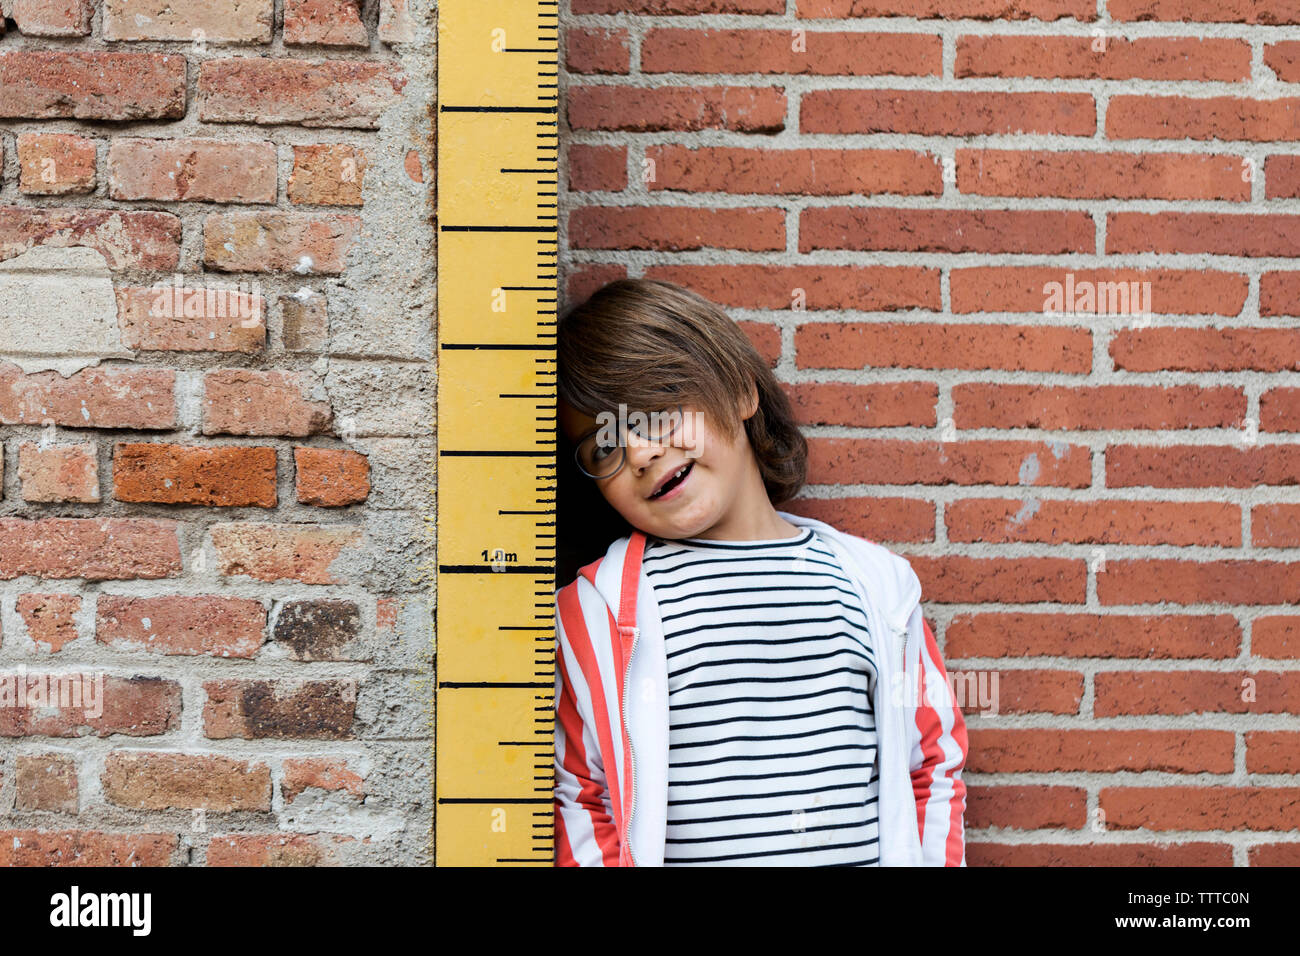 Child In striped top Being Measured On A Keepsake Measuring Stick Stock Photo